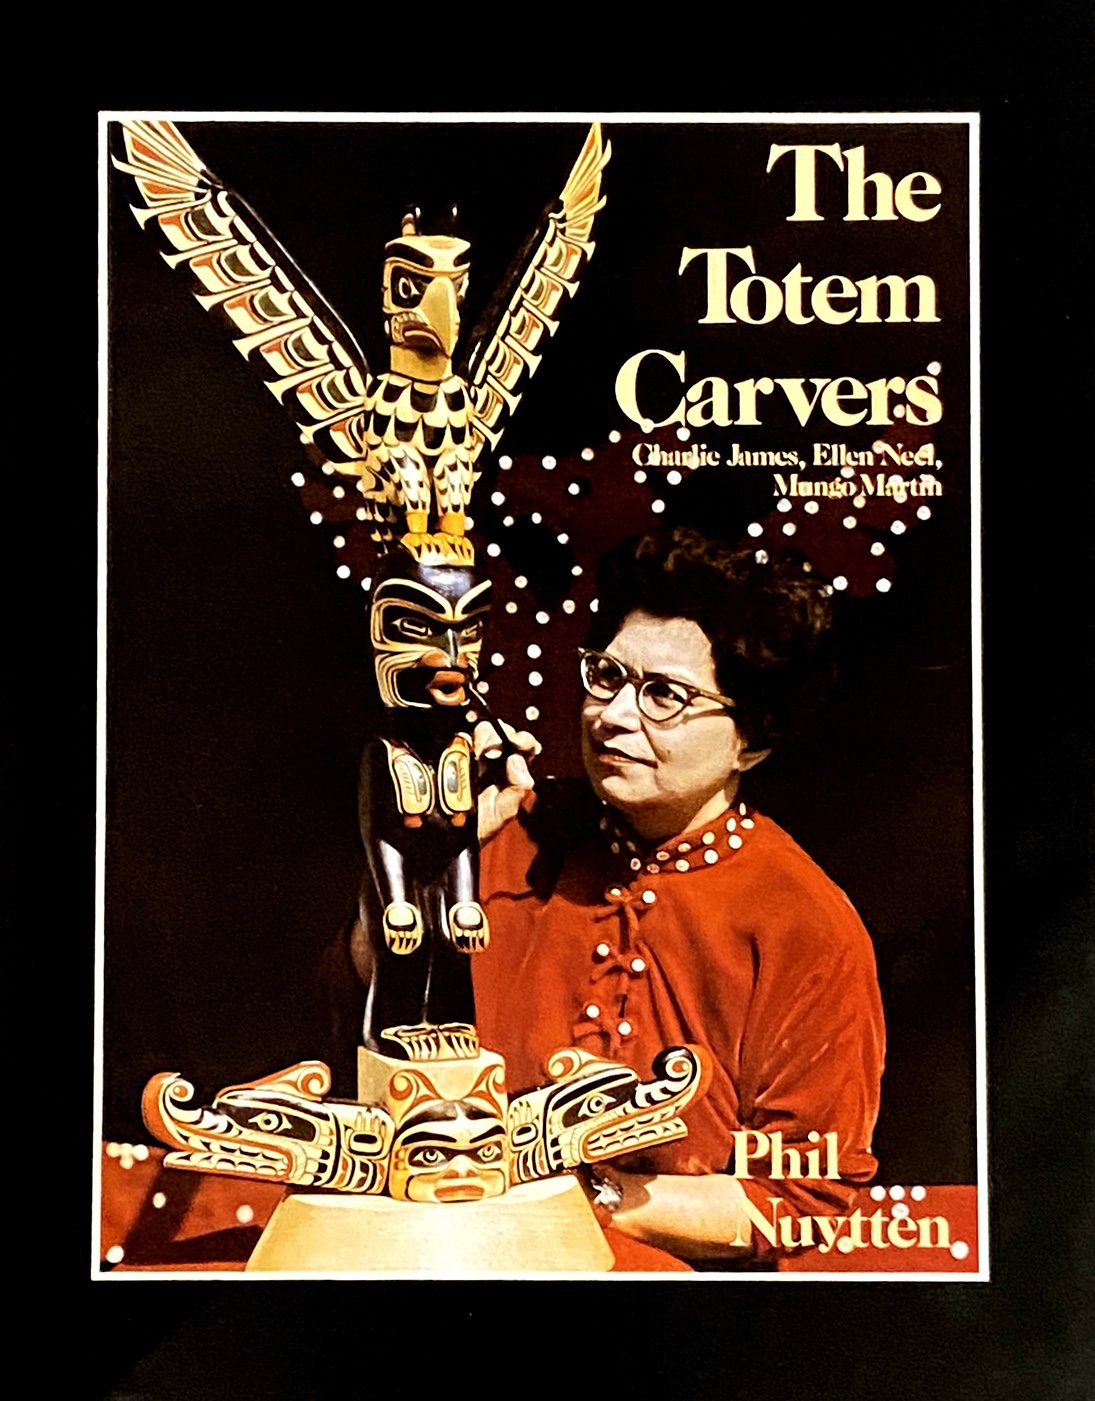 The Totem Carvers: Charlie James, Ellen Neel, and Mungo Martin Hardcover Book by Phil Nuytten